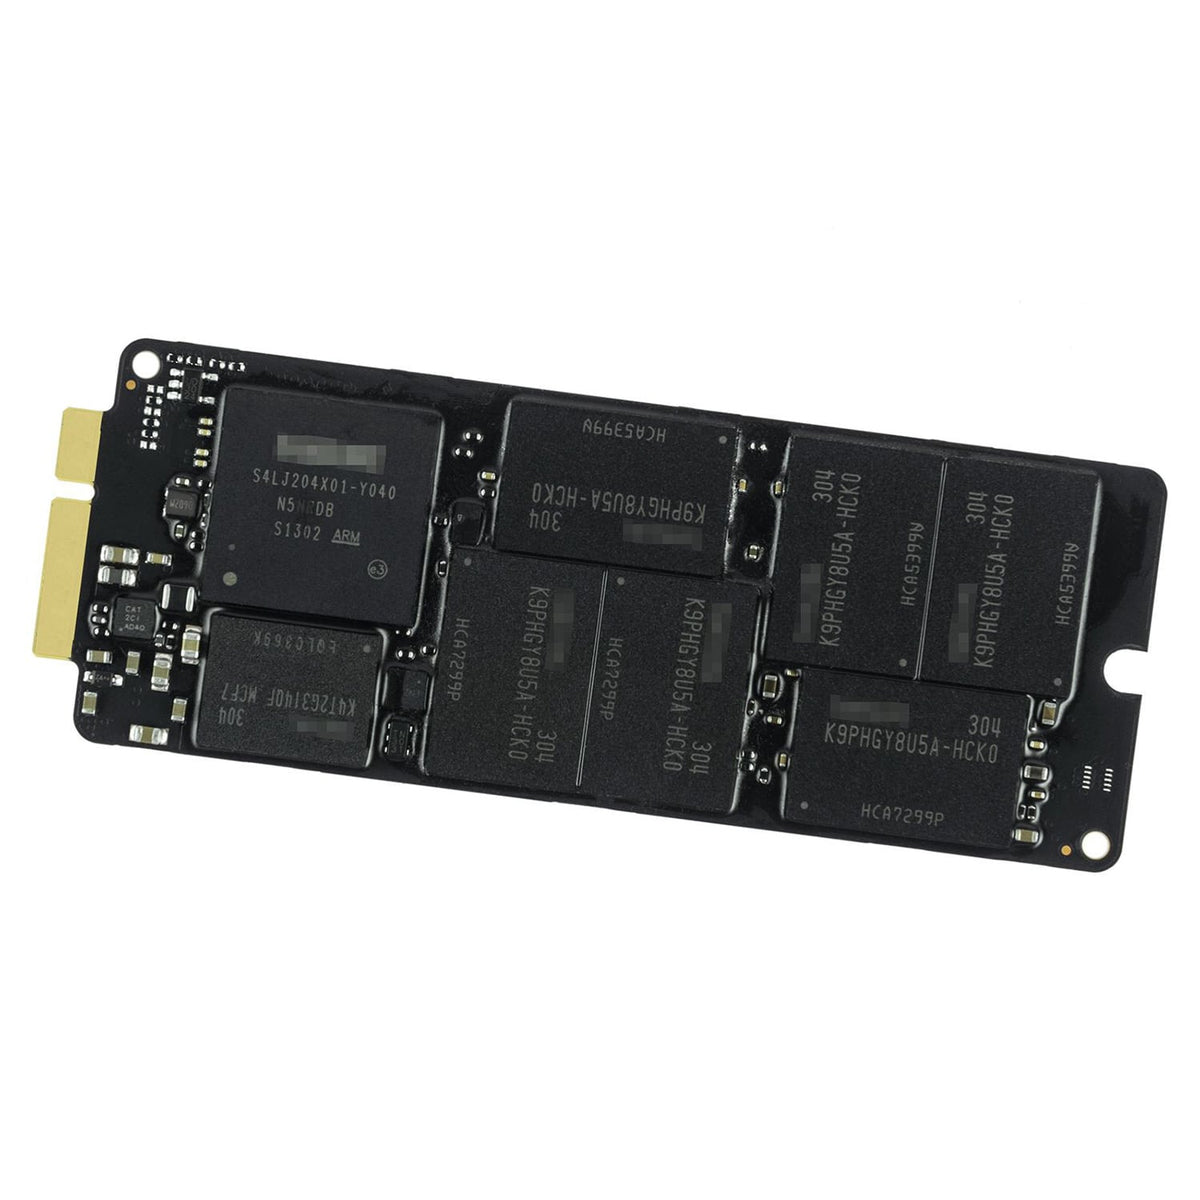 SOLID STATE DRIVE (SSD) FOR IMAC A1418/A1419 (LATE 2012, EARLY 2013)